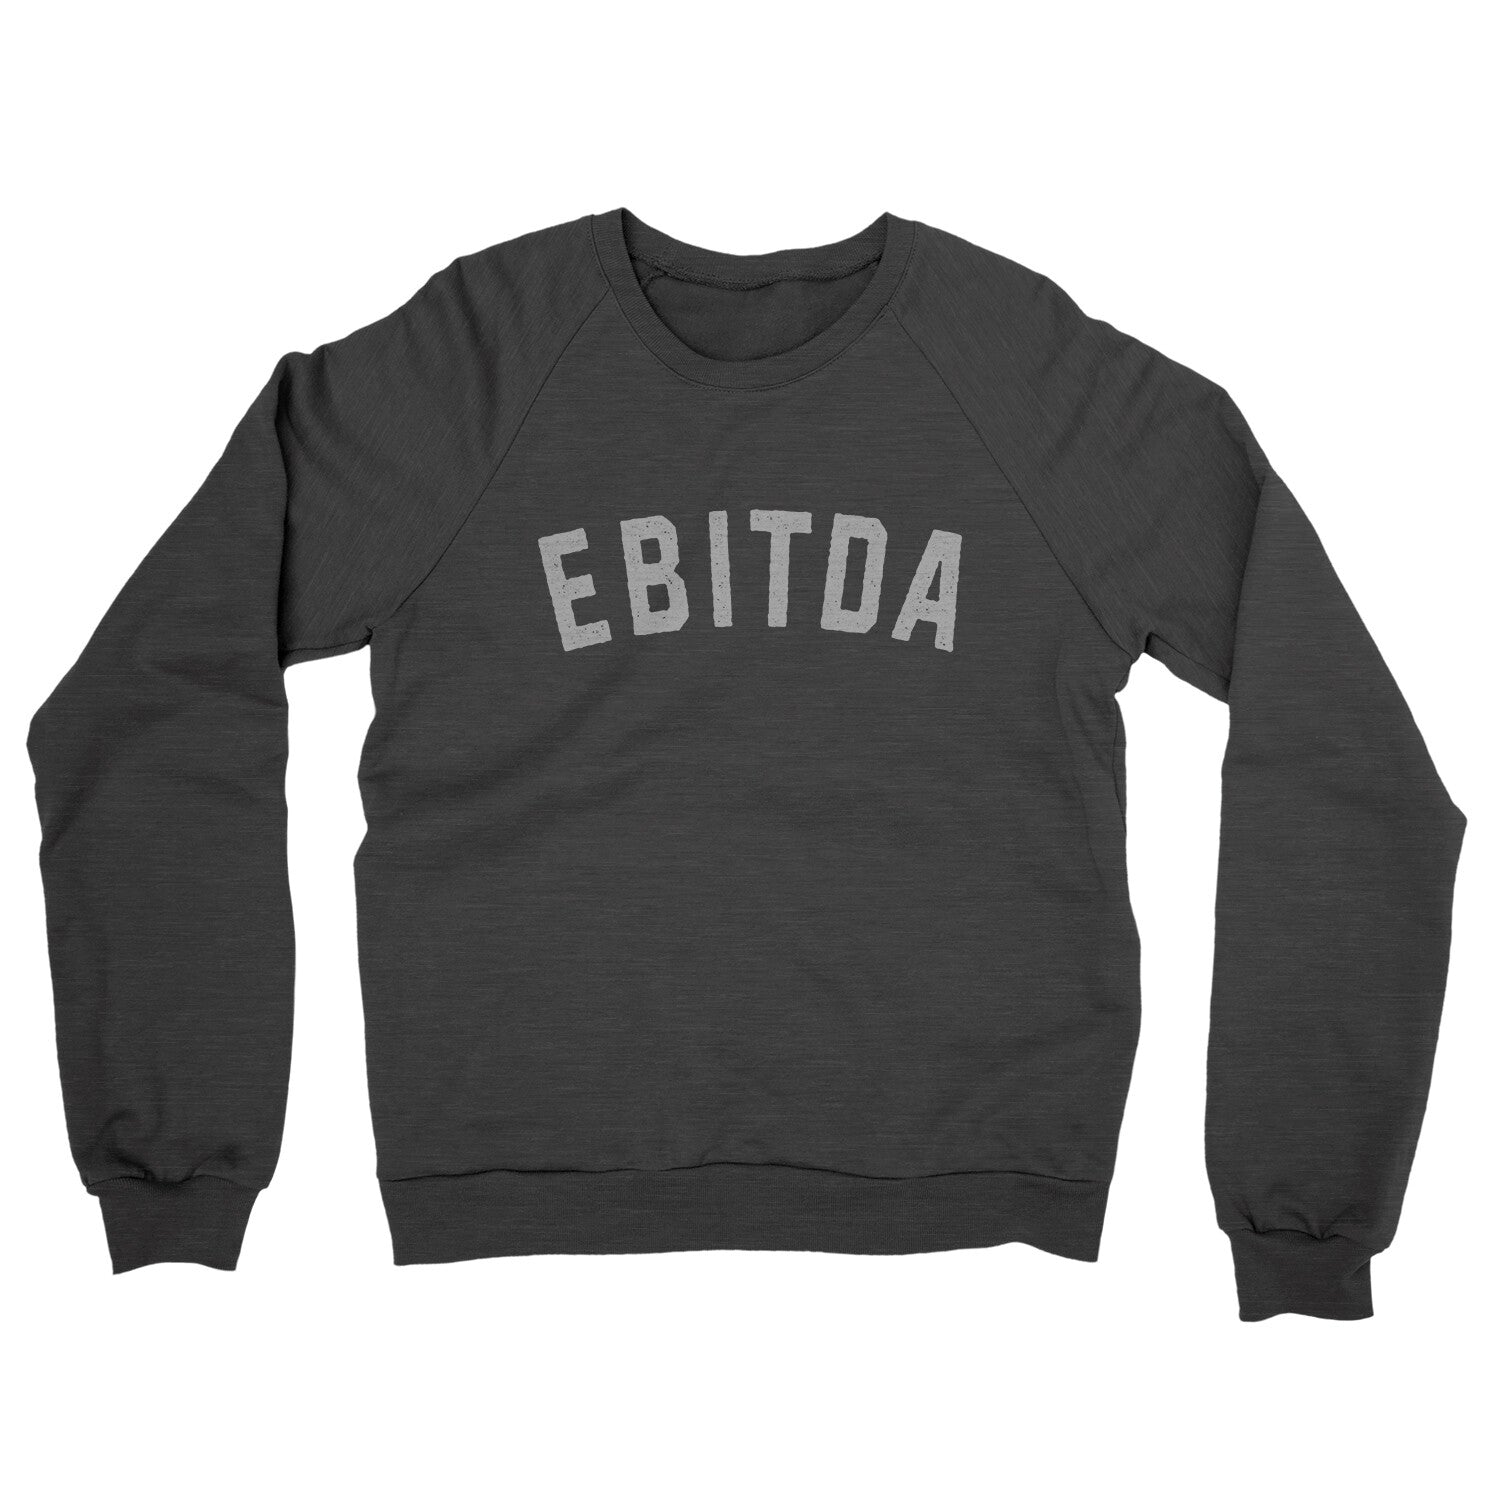 EBITDA in Charcoal Heather Color